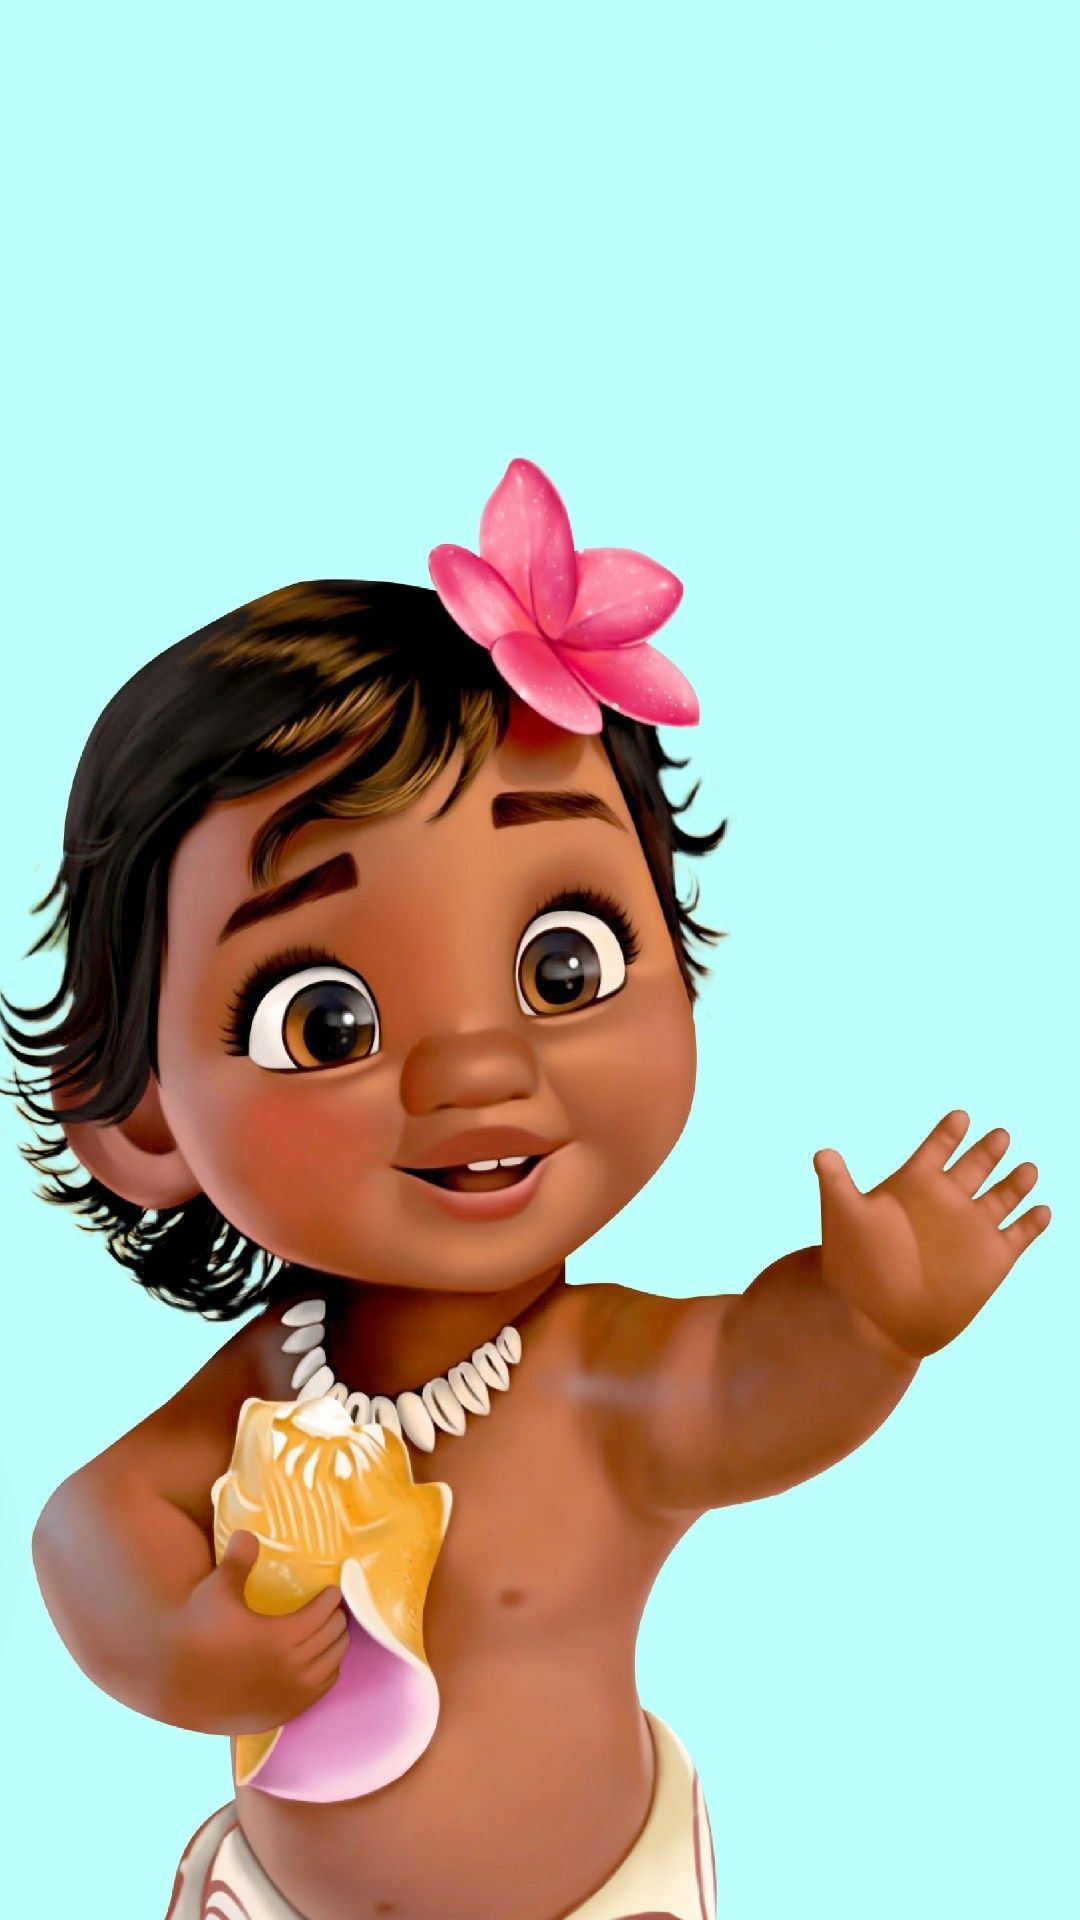 Free download Wallpaper for iphone moana baby In love with Characters in for Desktop, Mobile. Wallpaper iphone disney, Disney wallpaper, Disney princess picture